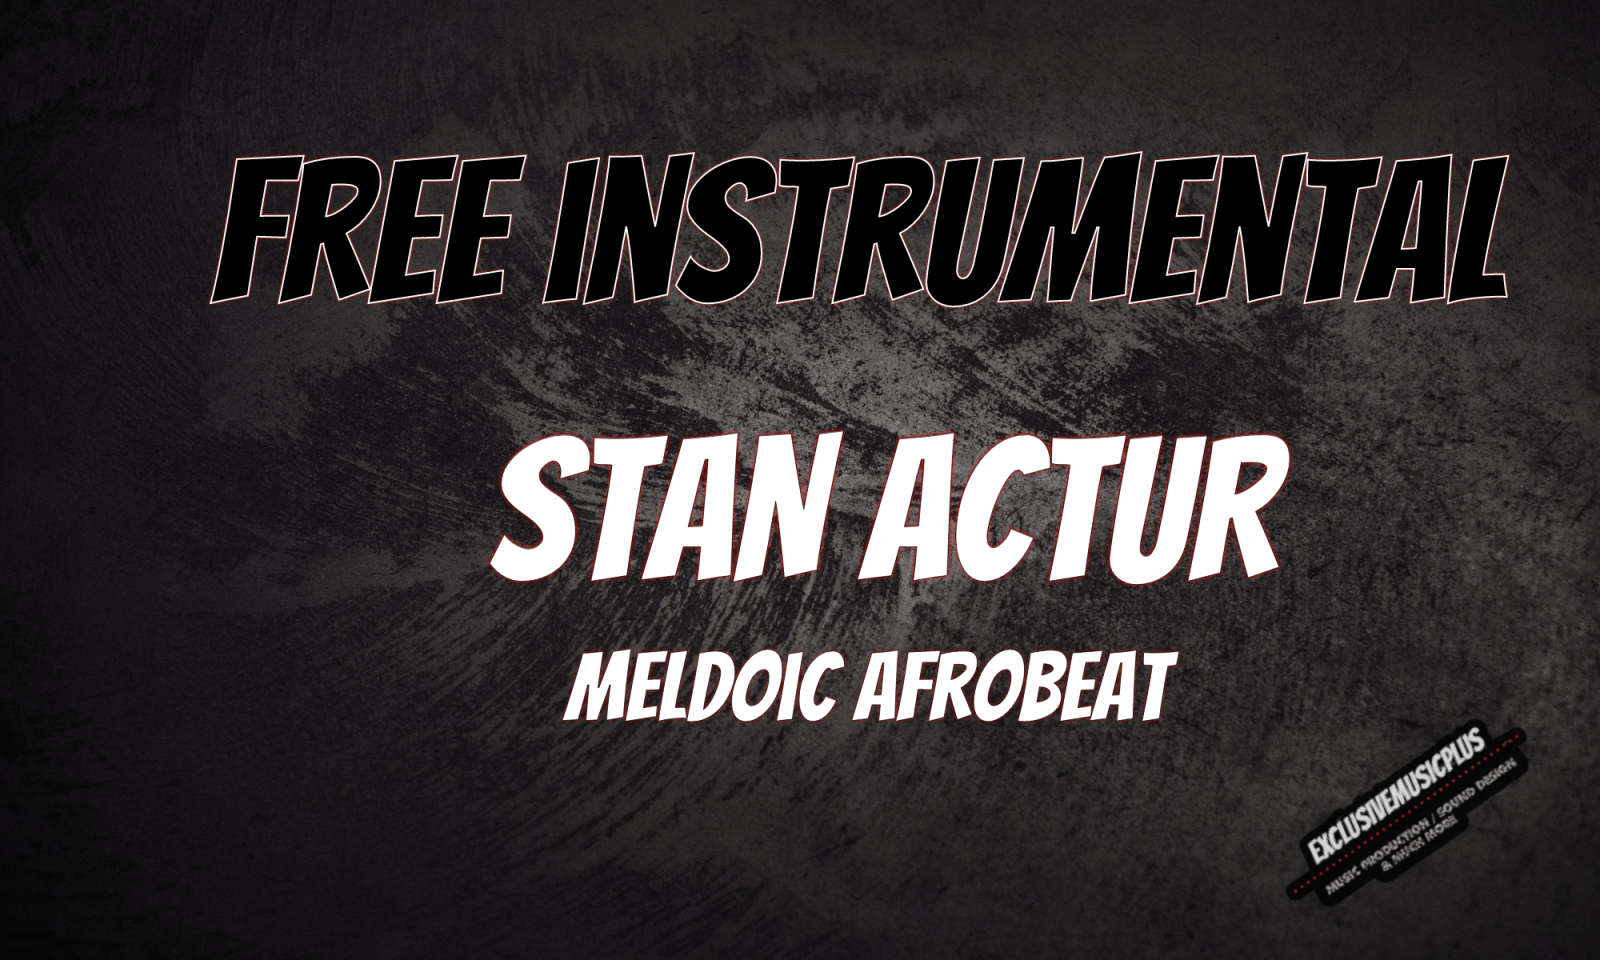 [Free Beat] Stan Actur - Melodic Afro Beat